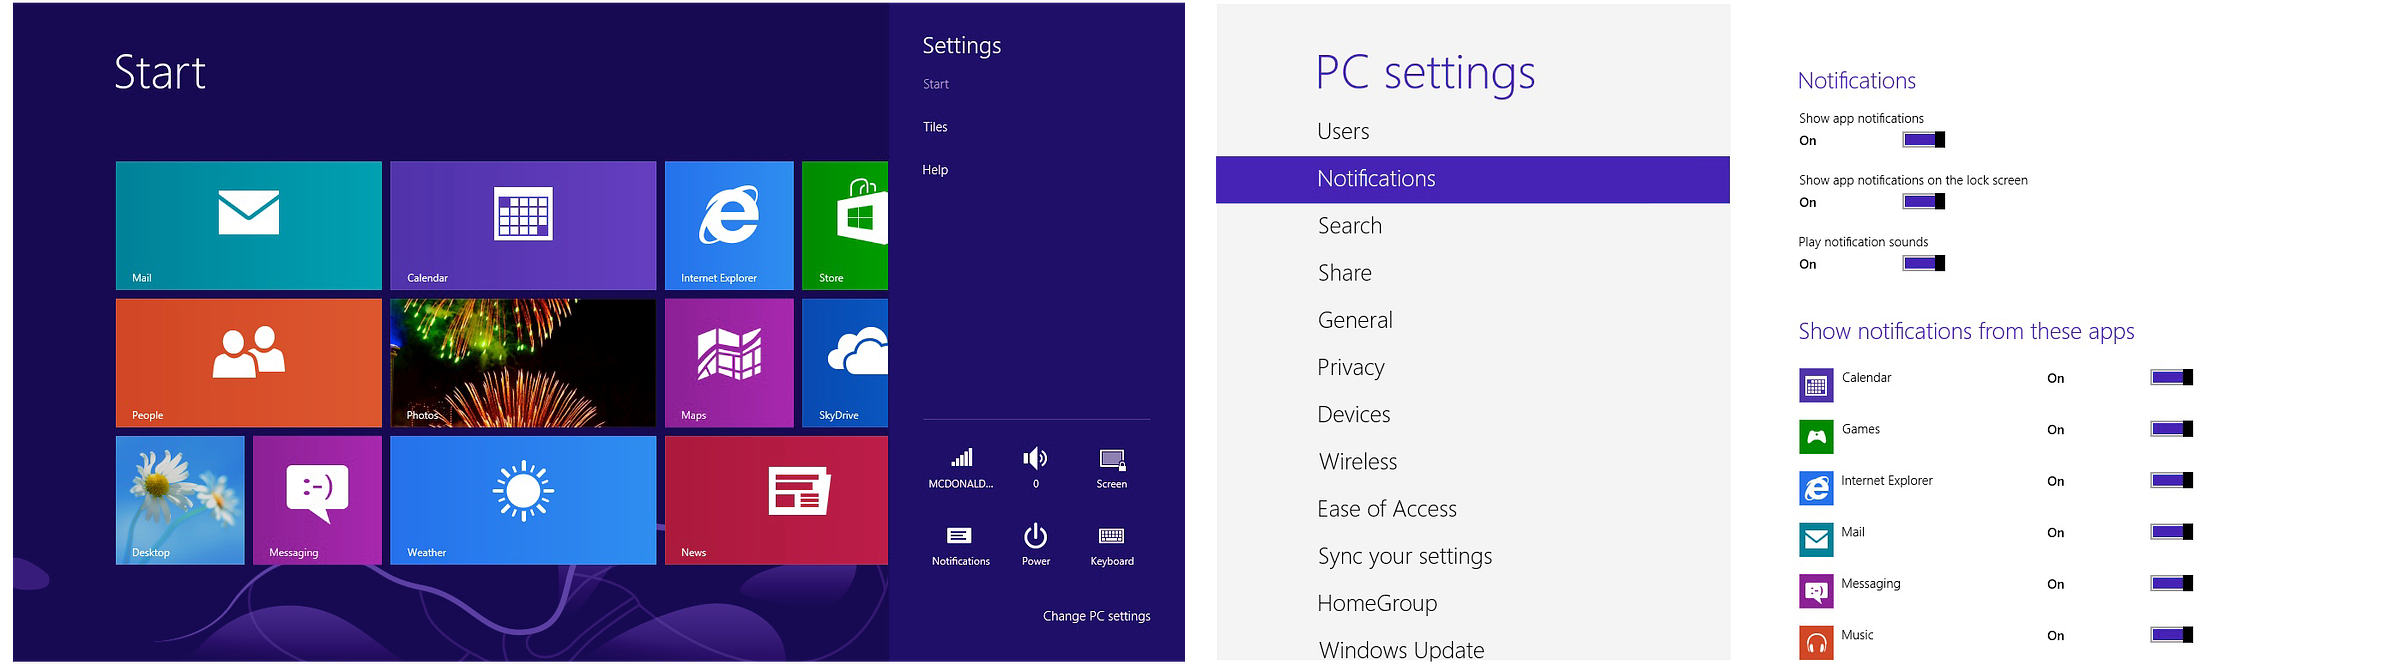 Two views of the settings. The first shows the basic settings available from the Start screen including wifi, sound, screen, keyboard, notifications, and power. there's text to tap to launch the settings app.  The settings app is shown which provides detailed settings across a broad range of configuration options. Shown are the options for Notifications.